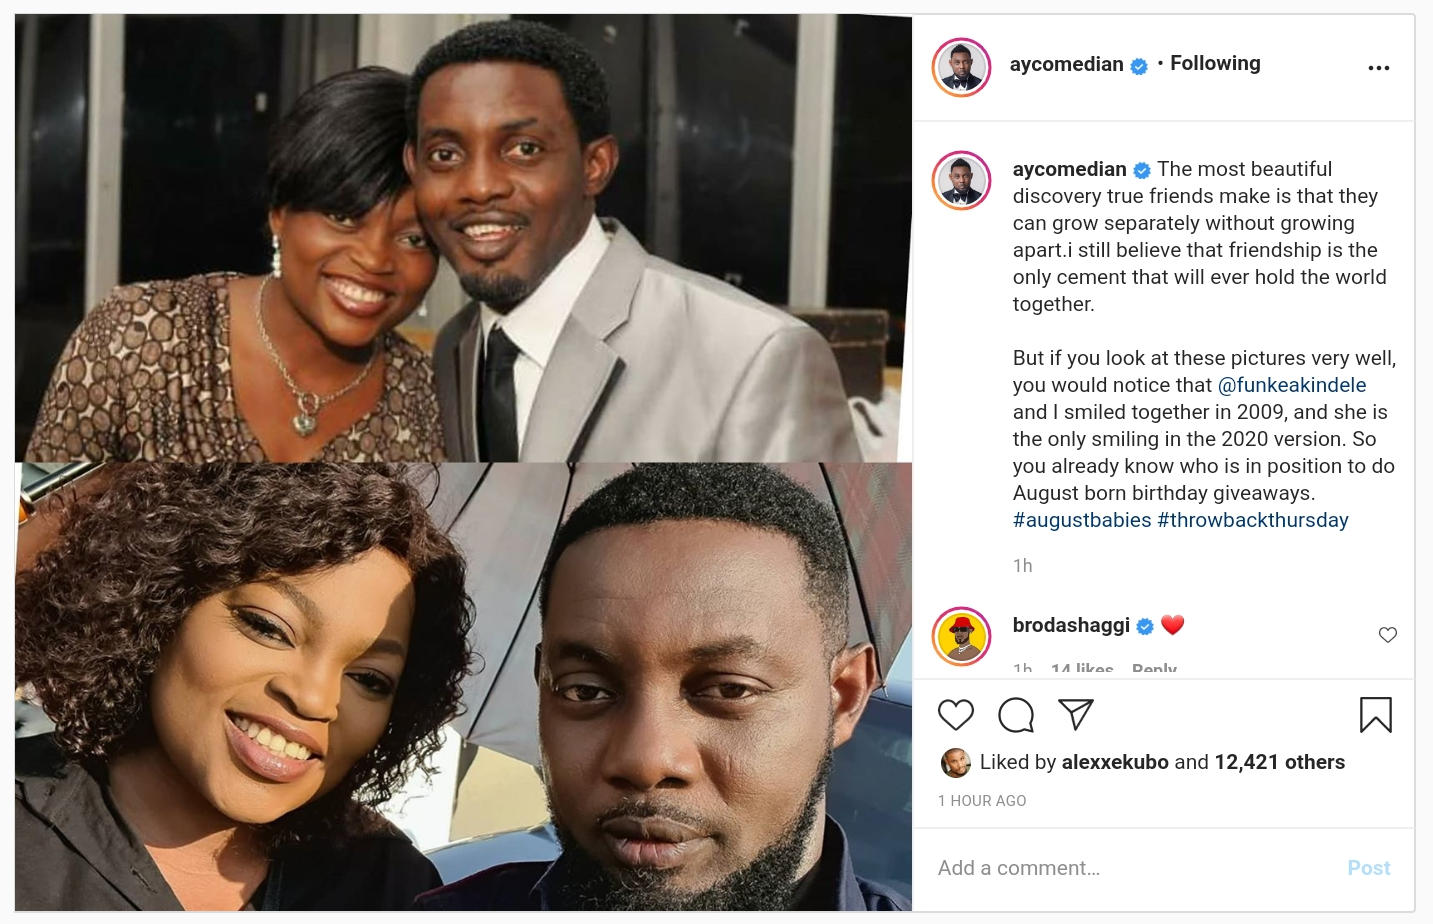 Comedian AY Positions Funke Akindele Into August Born Giveaways